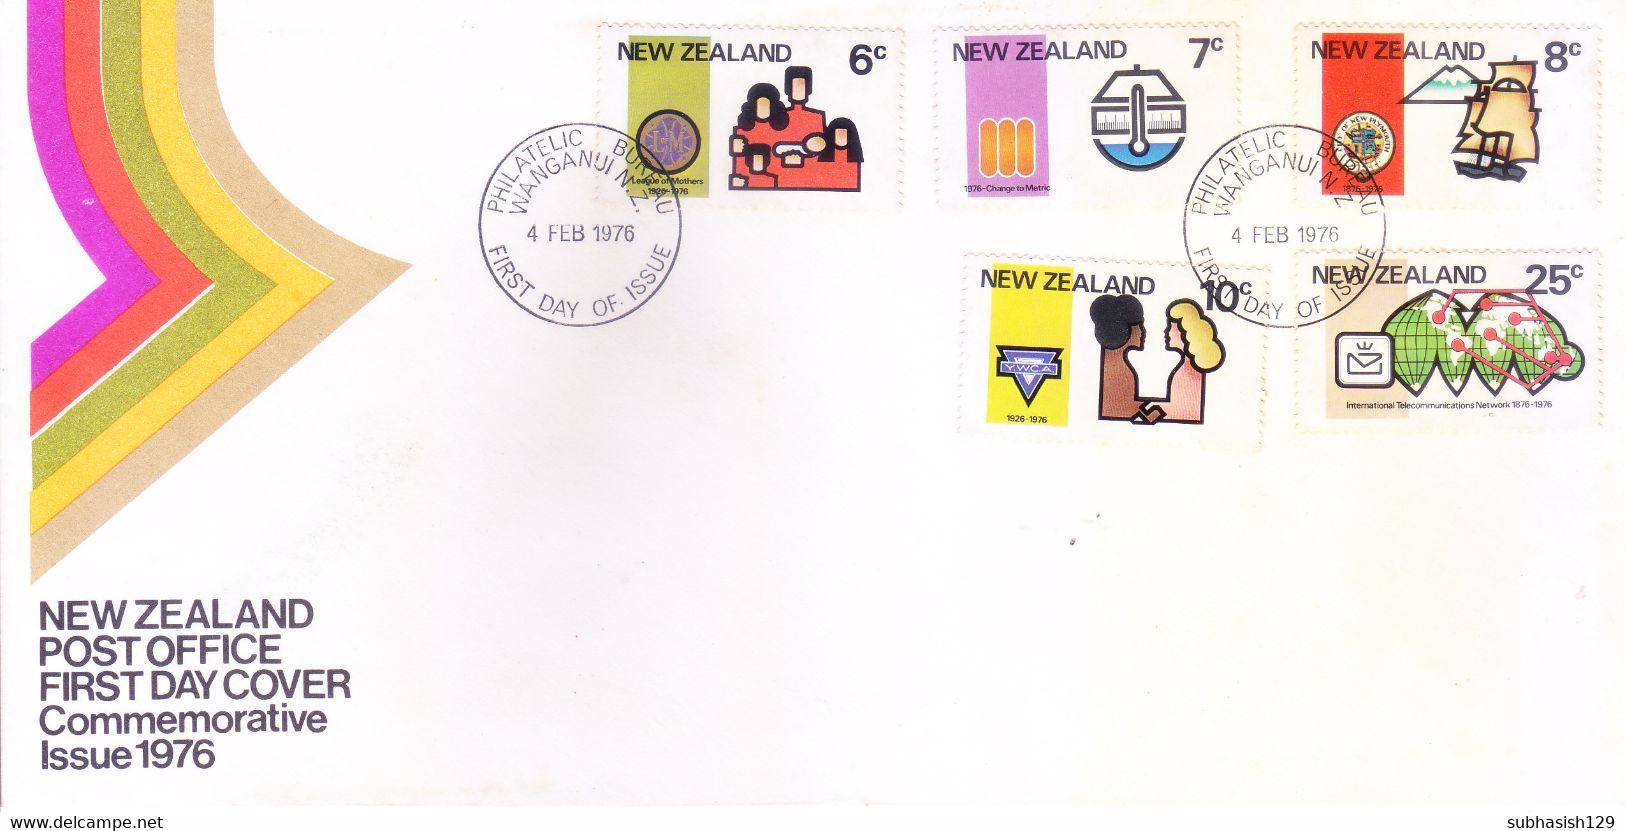 NEW ZEALAND : FIRST DAY COVER : 04 FEBRUARY 1976 : SET OF 5 : ANNIVERSARIES AND EVENTS - Covers & Documents